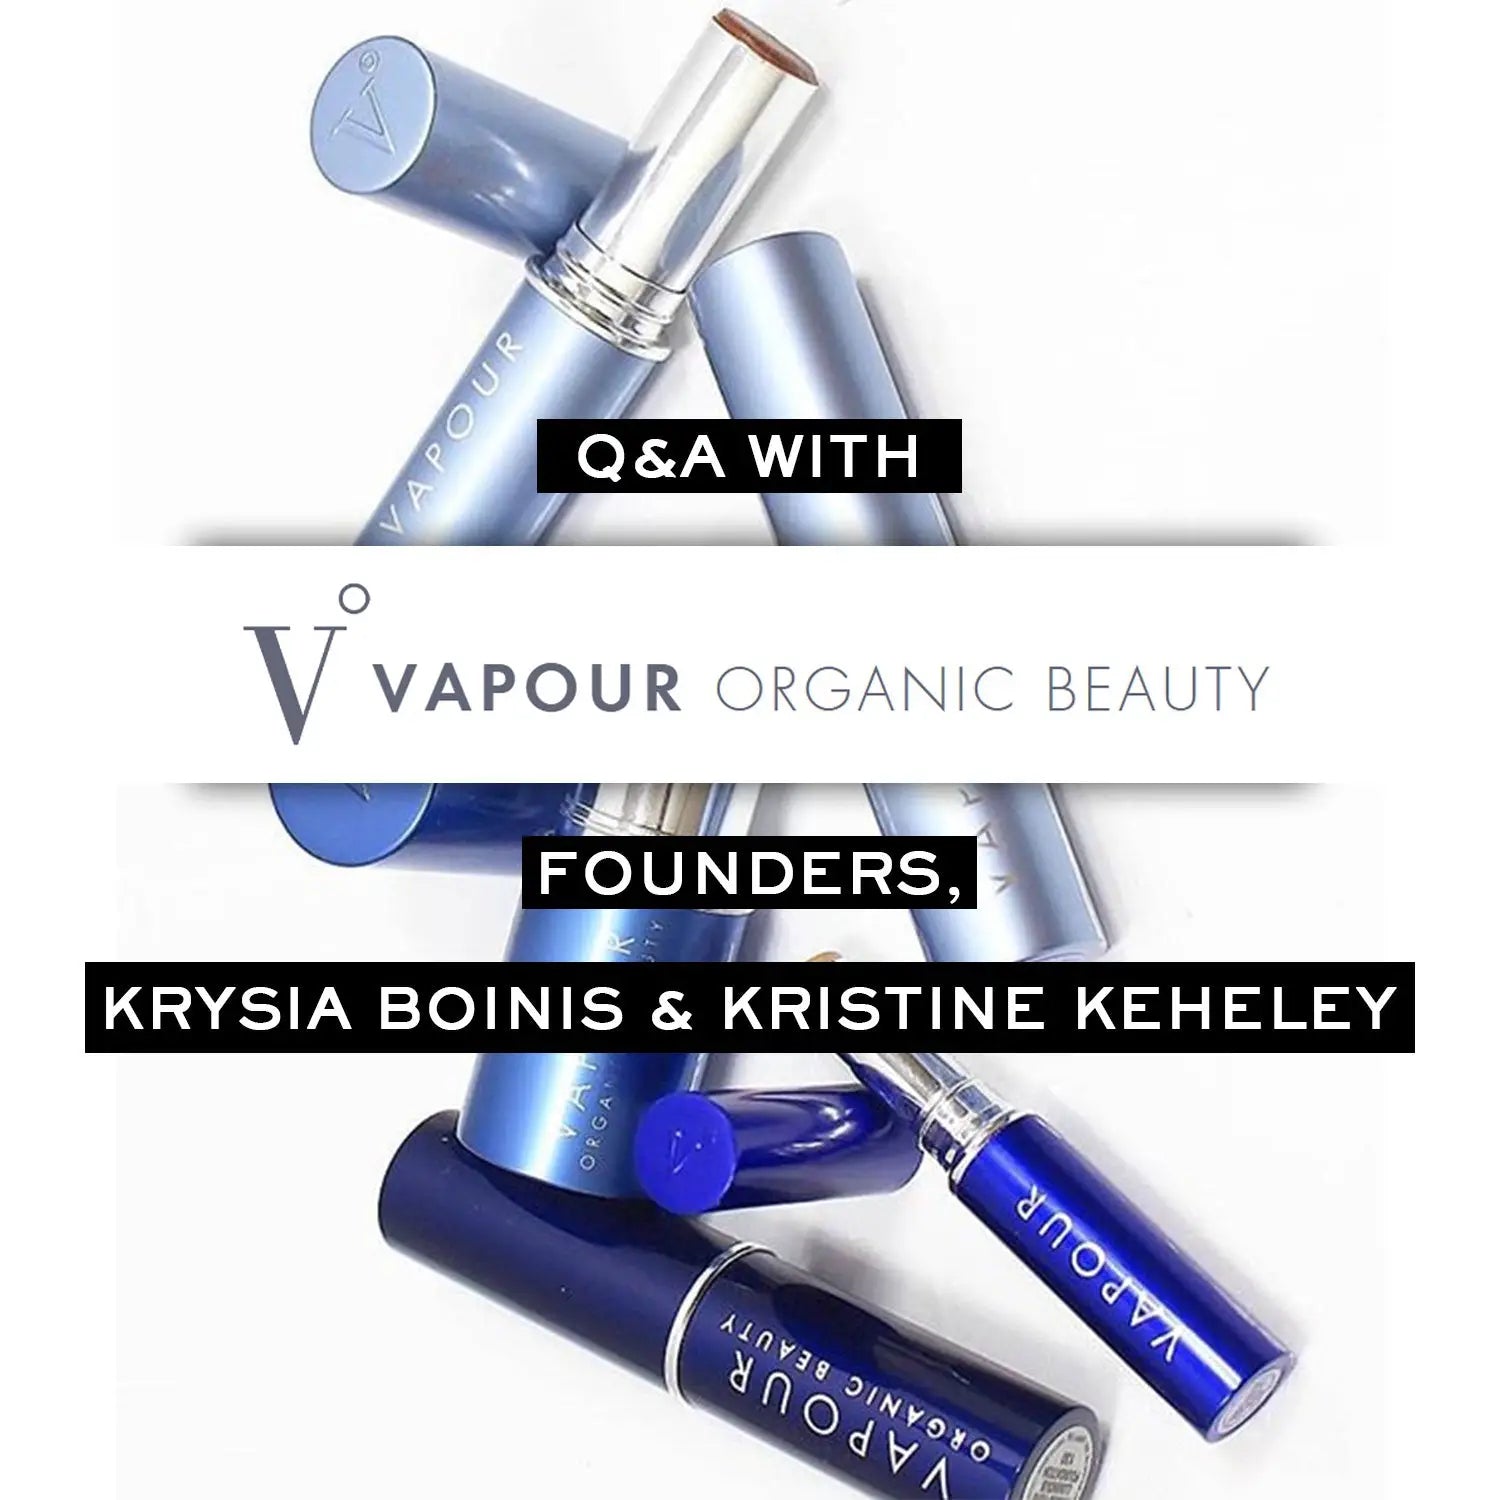 Q&A WITH VAPOUR ORGANIC BEAUTY FOUNDERS, KRYSIA BOINIS & KRISTINE KEHELEY